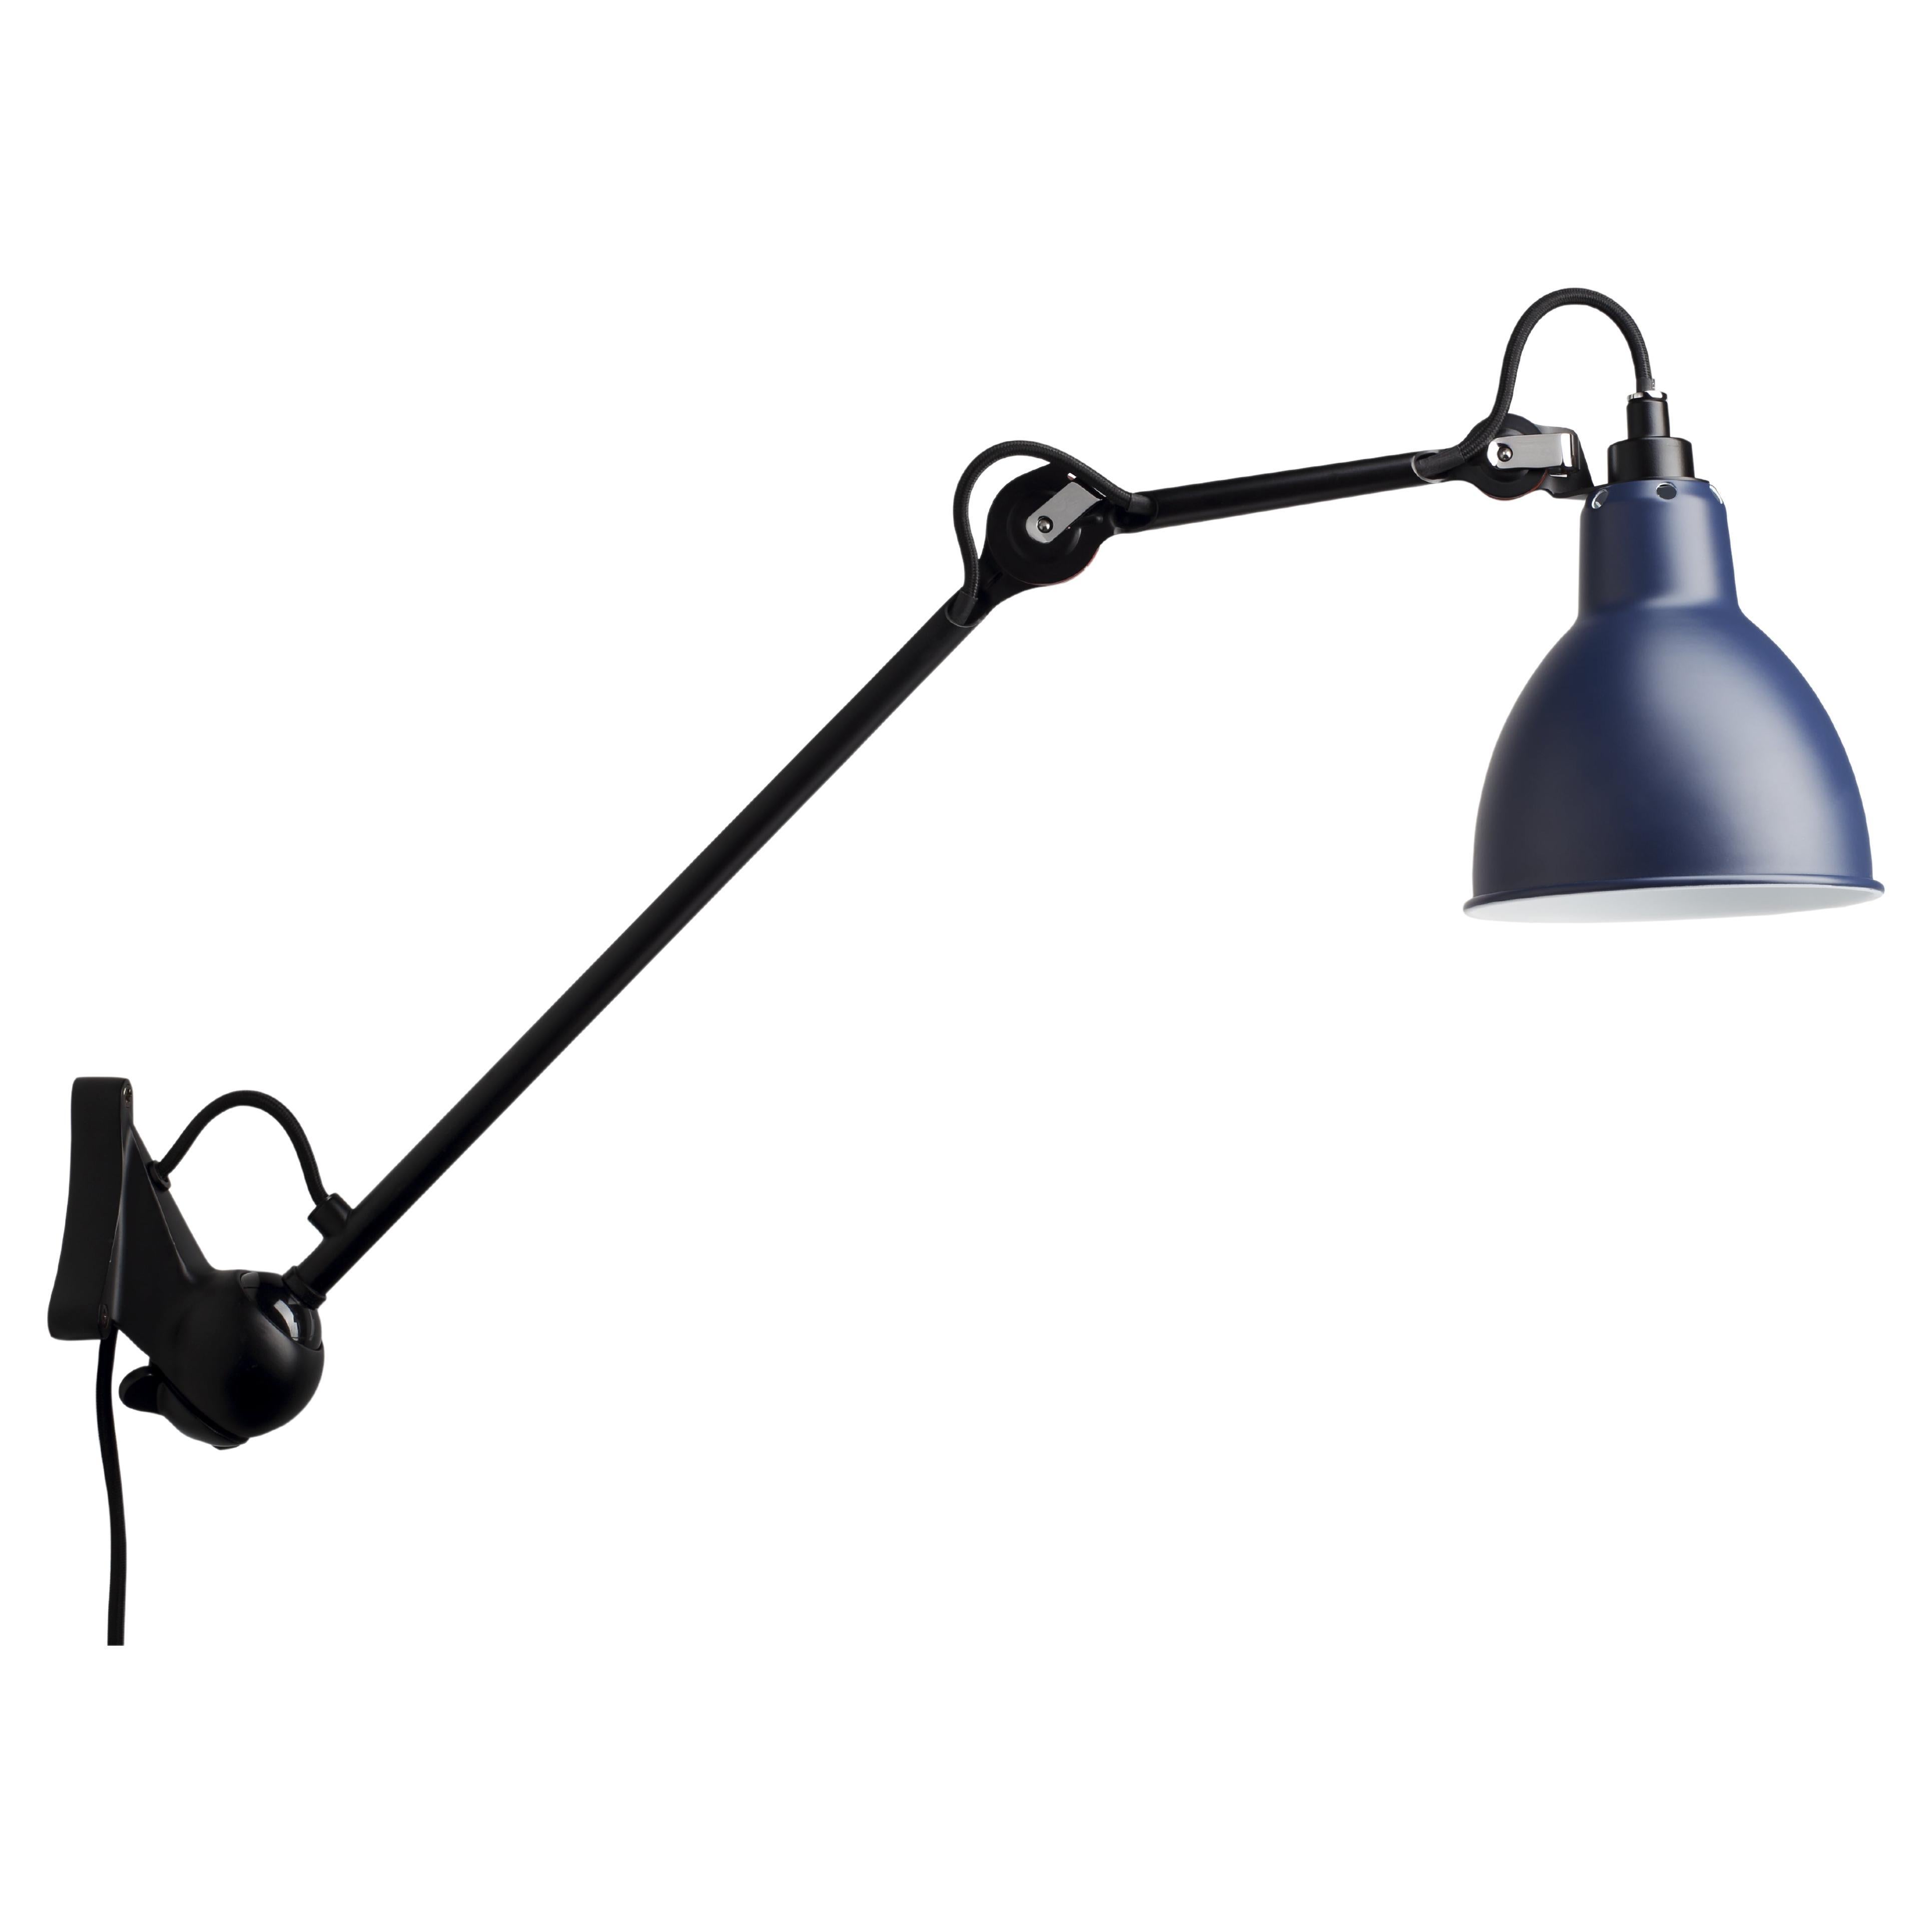 DCW Editions La Lampe Gras N°222 Wall Lamp in Black Arm and Blue Shade For Sale